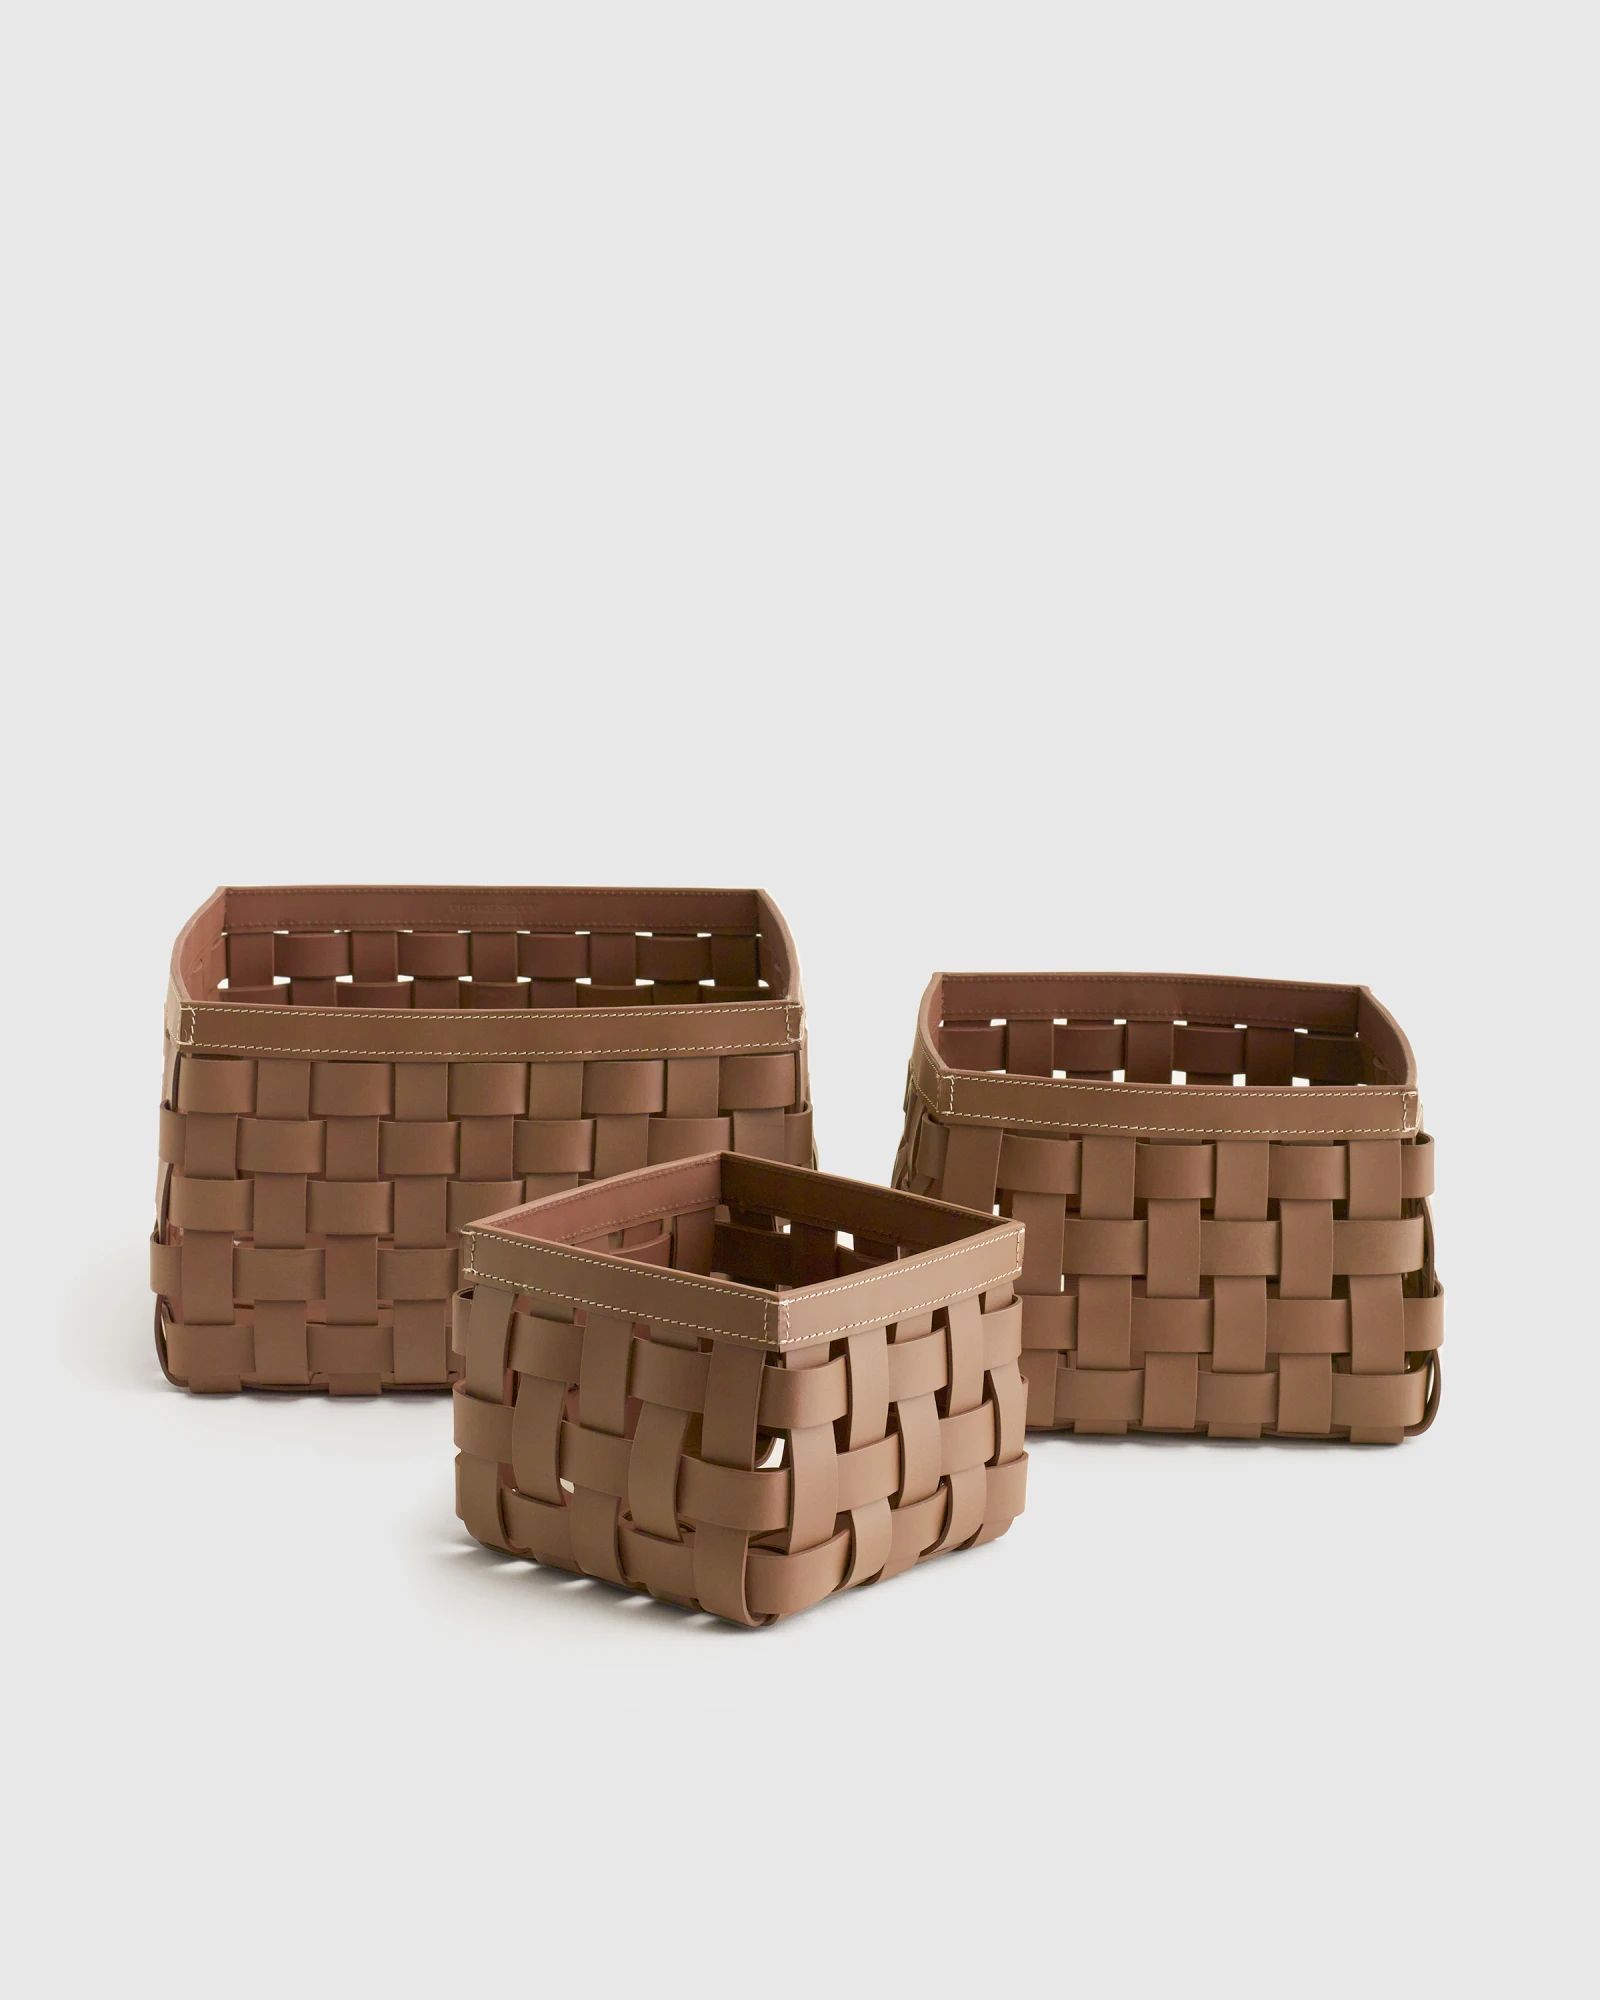 Recycled Woven Leather Baskets - Set of 3 | Quince